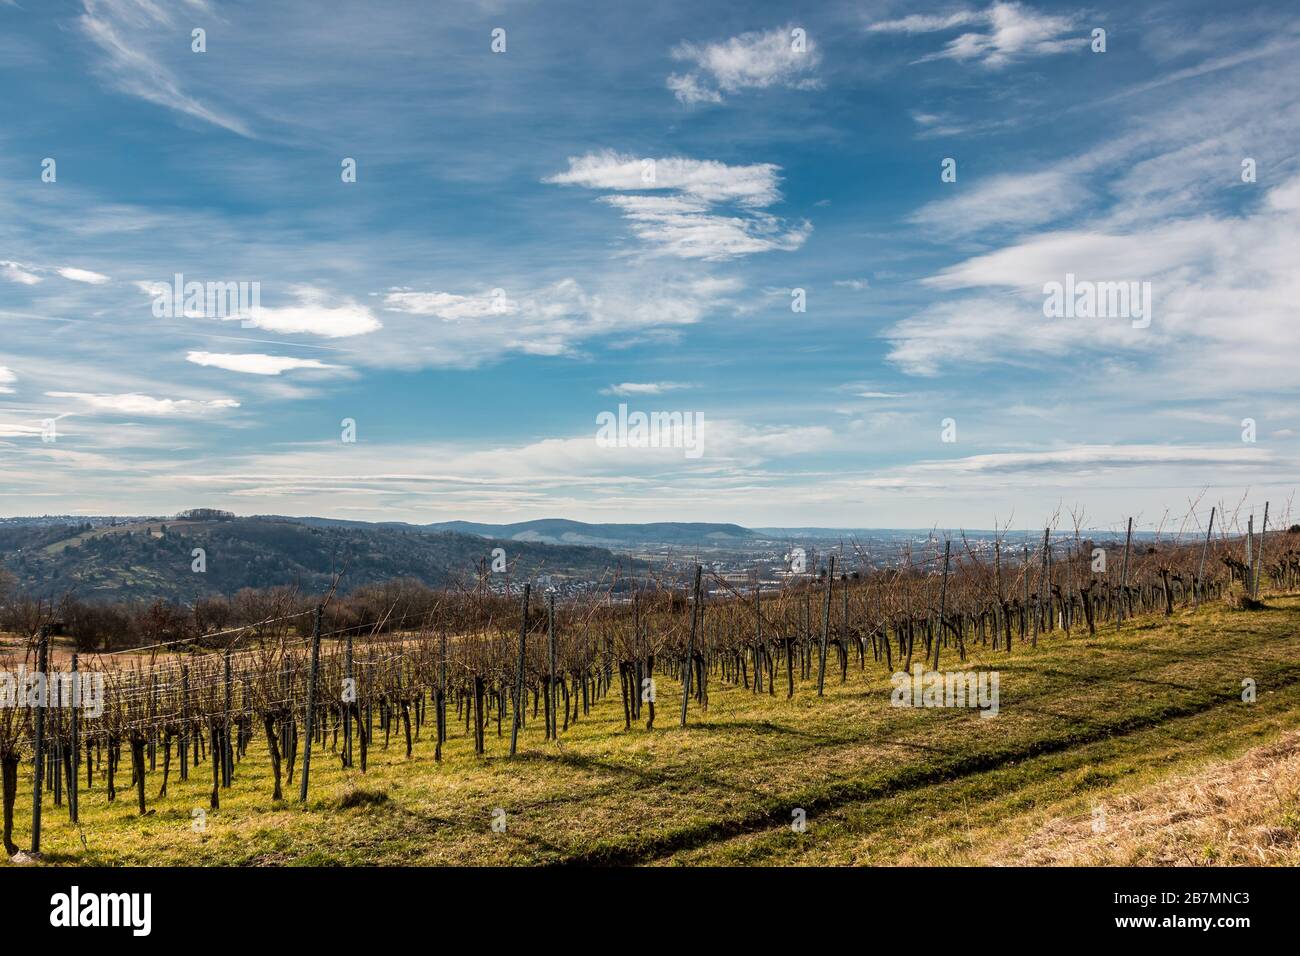 Big vineyard in the middle of the countryside Stock Photo